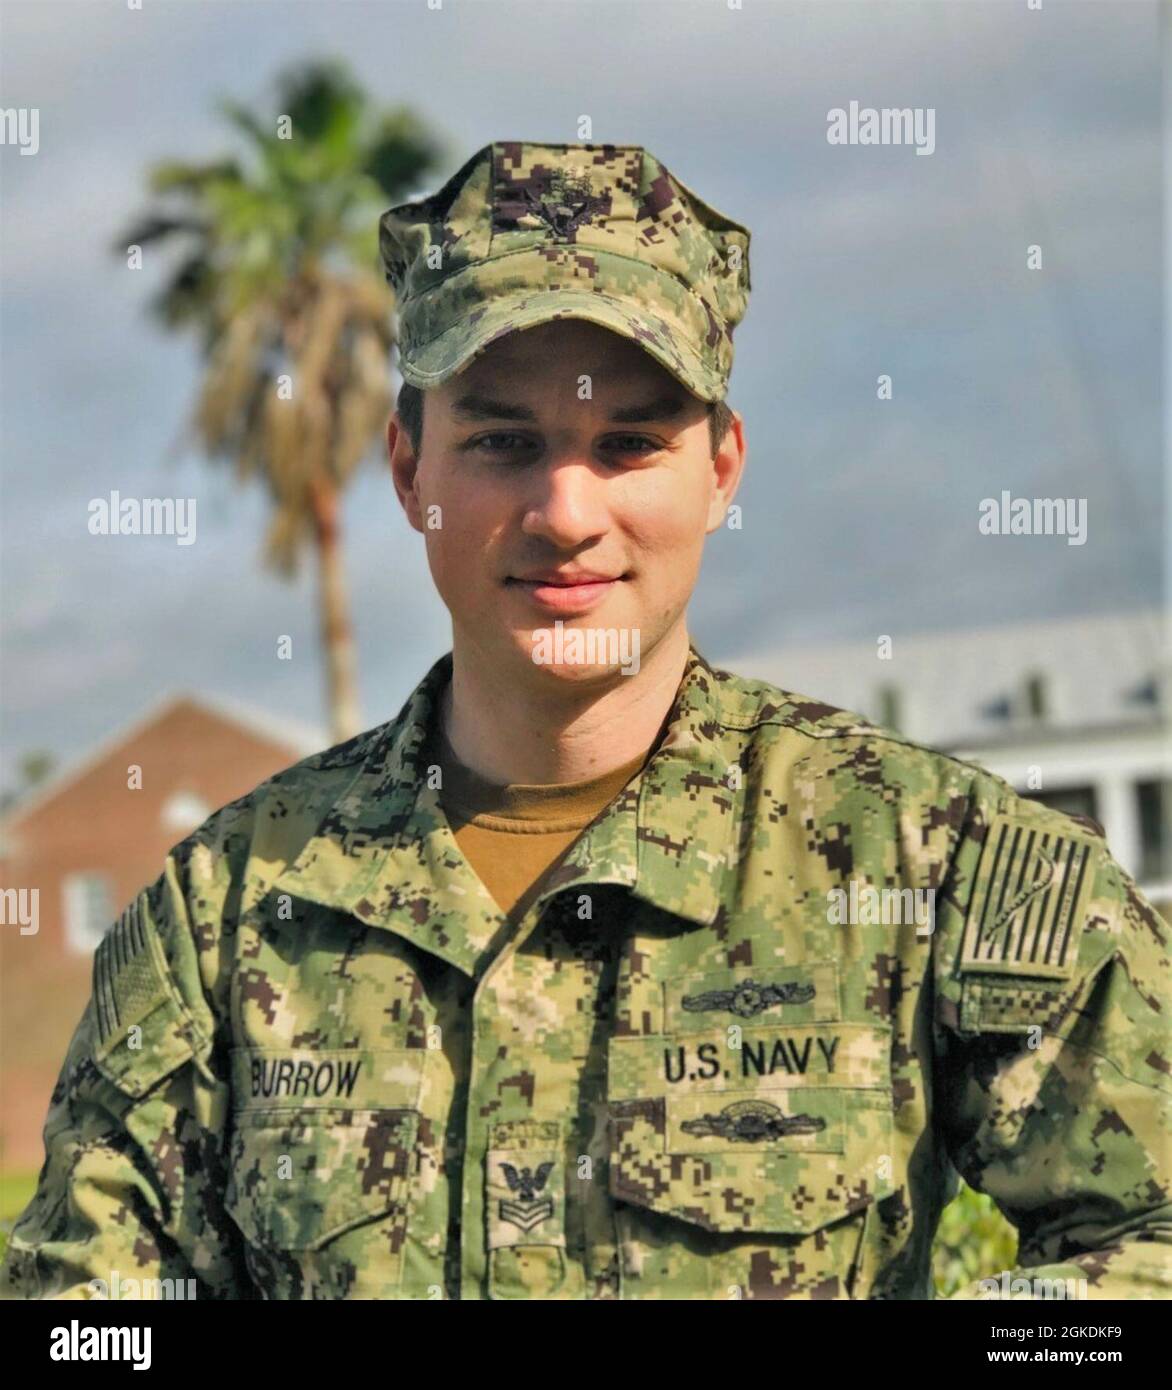 210323-N-XX139-0009 PENSACOLA, Fla. (March 23, 2021) Intelligence Specialist 1st Class Philip Burrow, a native of Arlington, Texas, is the Center for Information Warfare Training (CIWT) 2020 Sailor of the Year. As a CIWT intelligence specialist rating training manager, he is responsible for the oversight of 23 enlisted and four officer course supervisors in the analysis, revision, and development of 27 information warfare courses, training over 4,000 Sailors during this period. Stock Photo